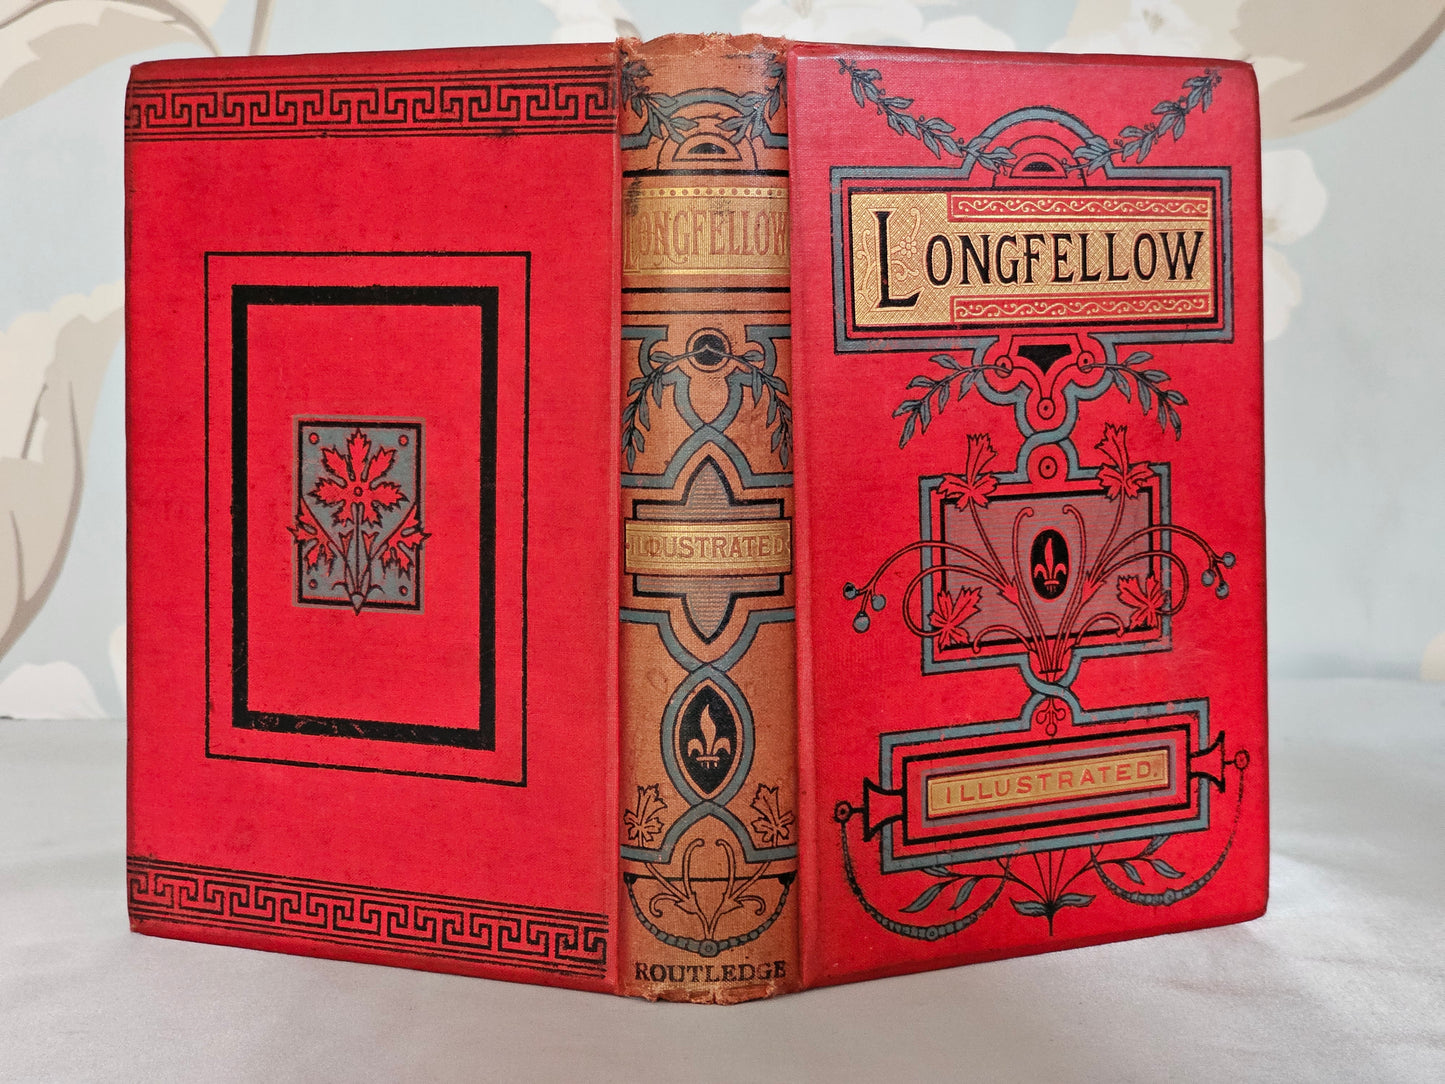 1890s Longfellow's Poetical Works, London / Routledge, London / 83 Illustrations / Beautiful Decorative Boards / Good Condition / Gilt Edged